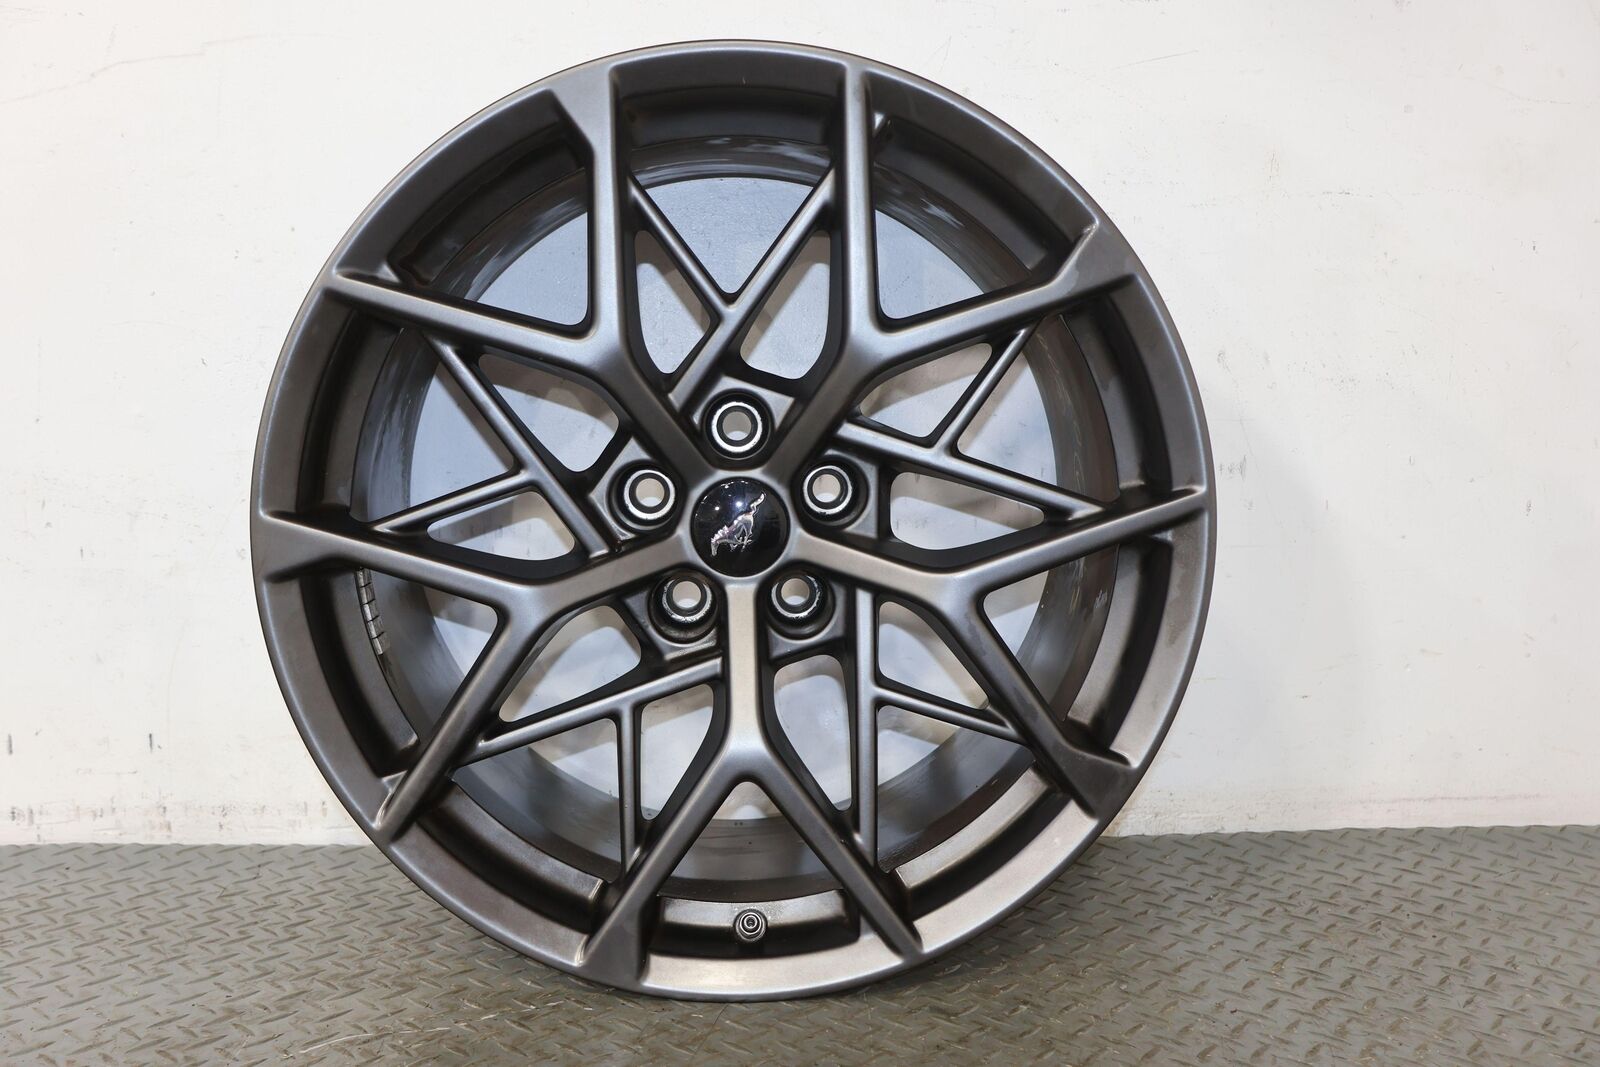 18-21 Ford Mustang Mach 1 Front 19x10.5 Y Spoke Wheel (Handling Pack) See Photos